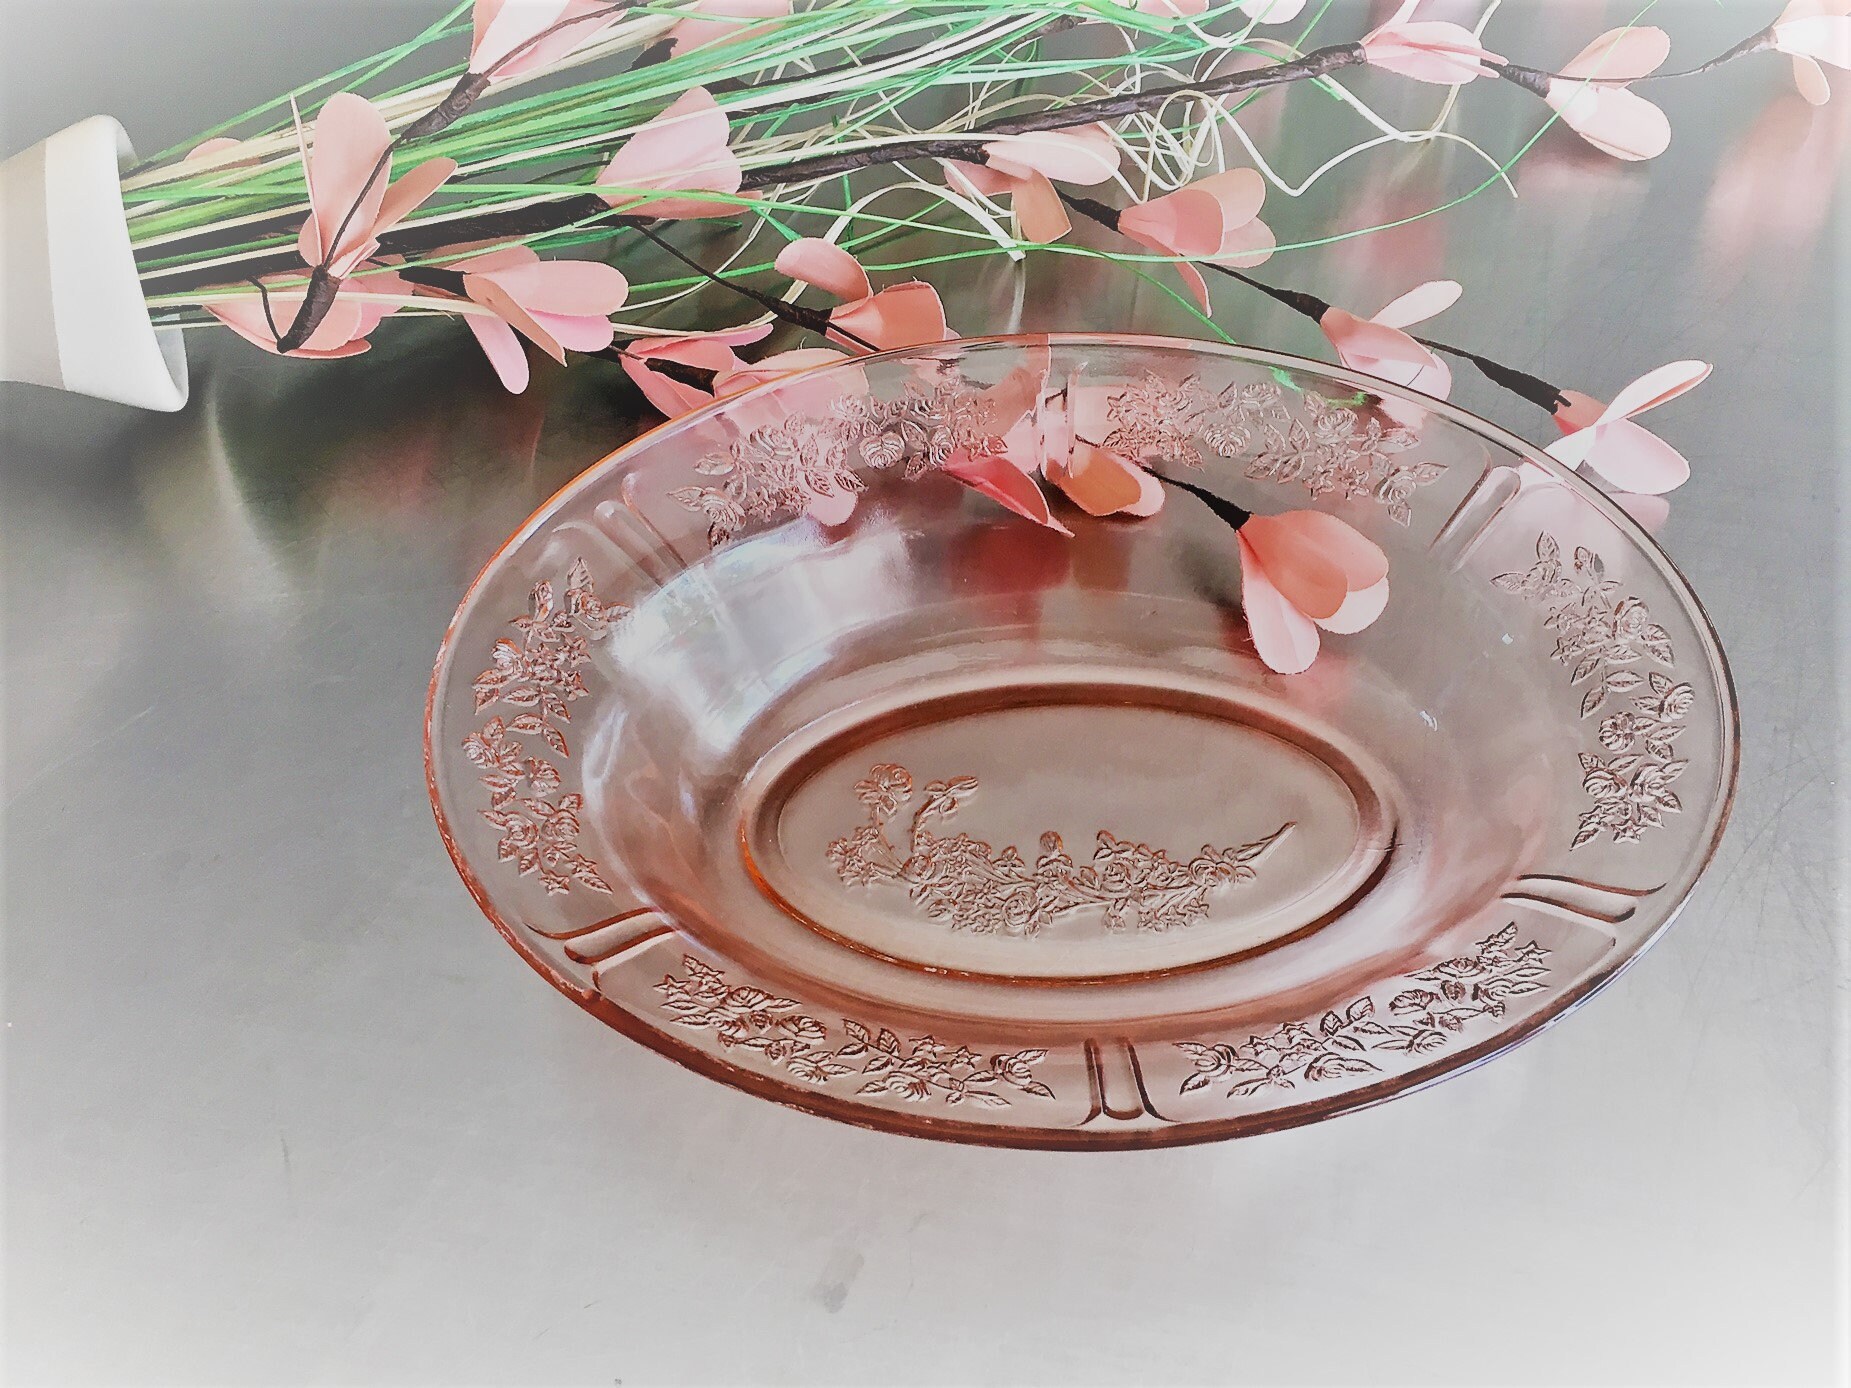 Pink Depression Glass - Federal Glass - Sharon or Cabbage Rose Pattern